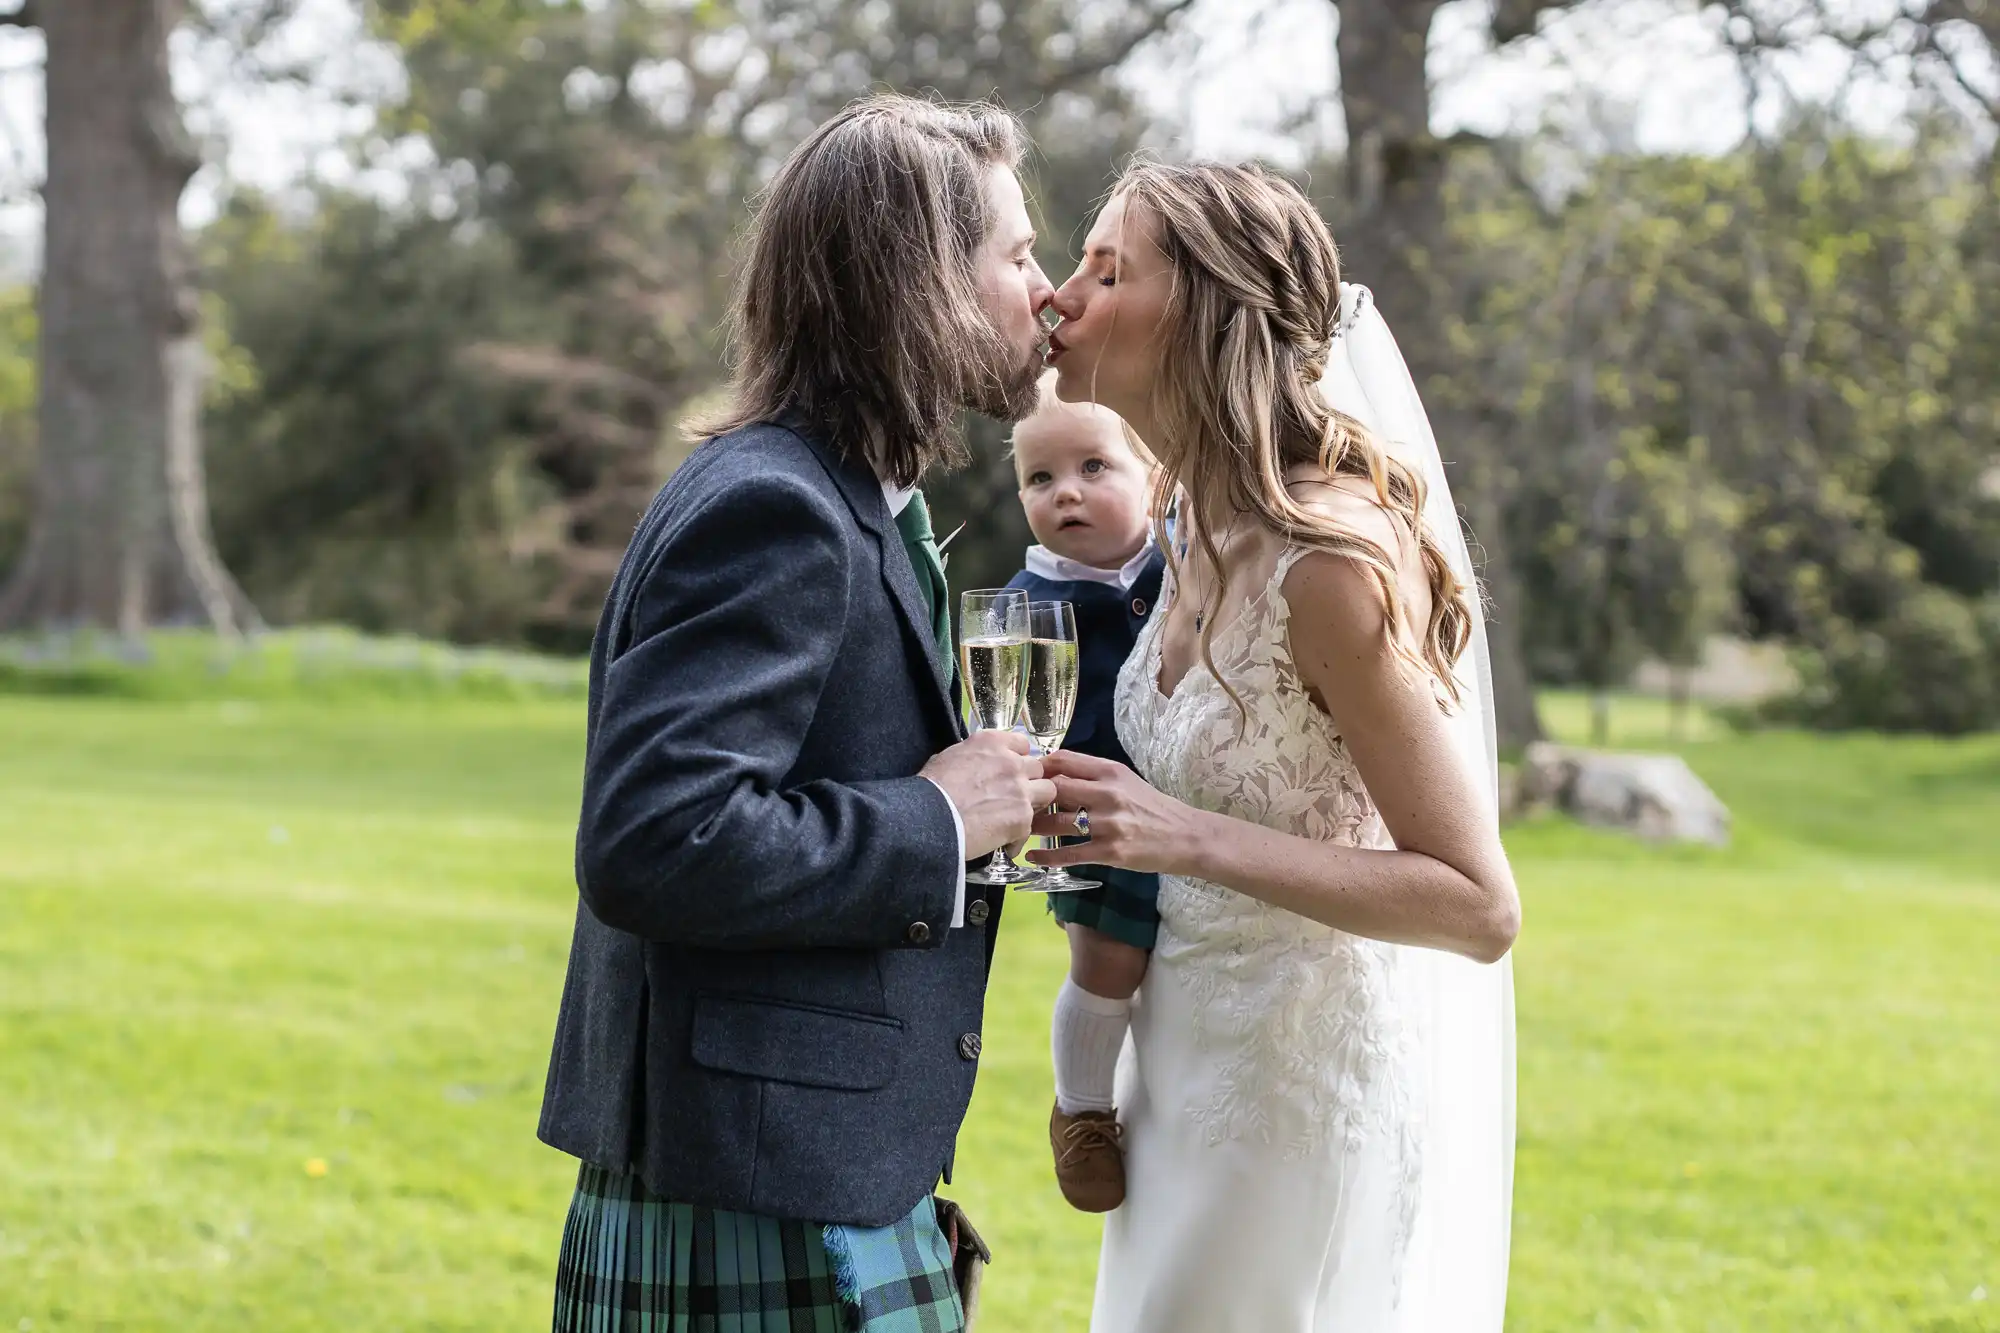 A couple in wedding attire kiss while holding champagne glasses, with the bride holding a baby between them. They stand on a grassy area with trees in the background.